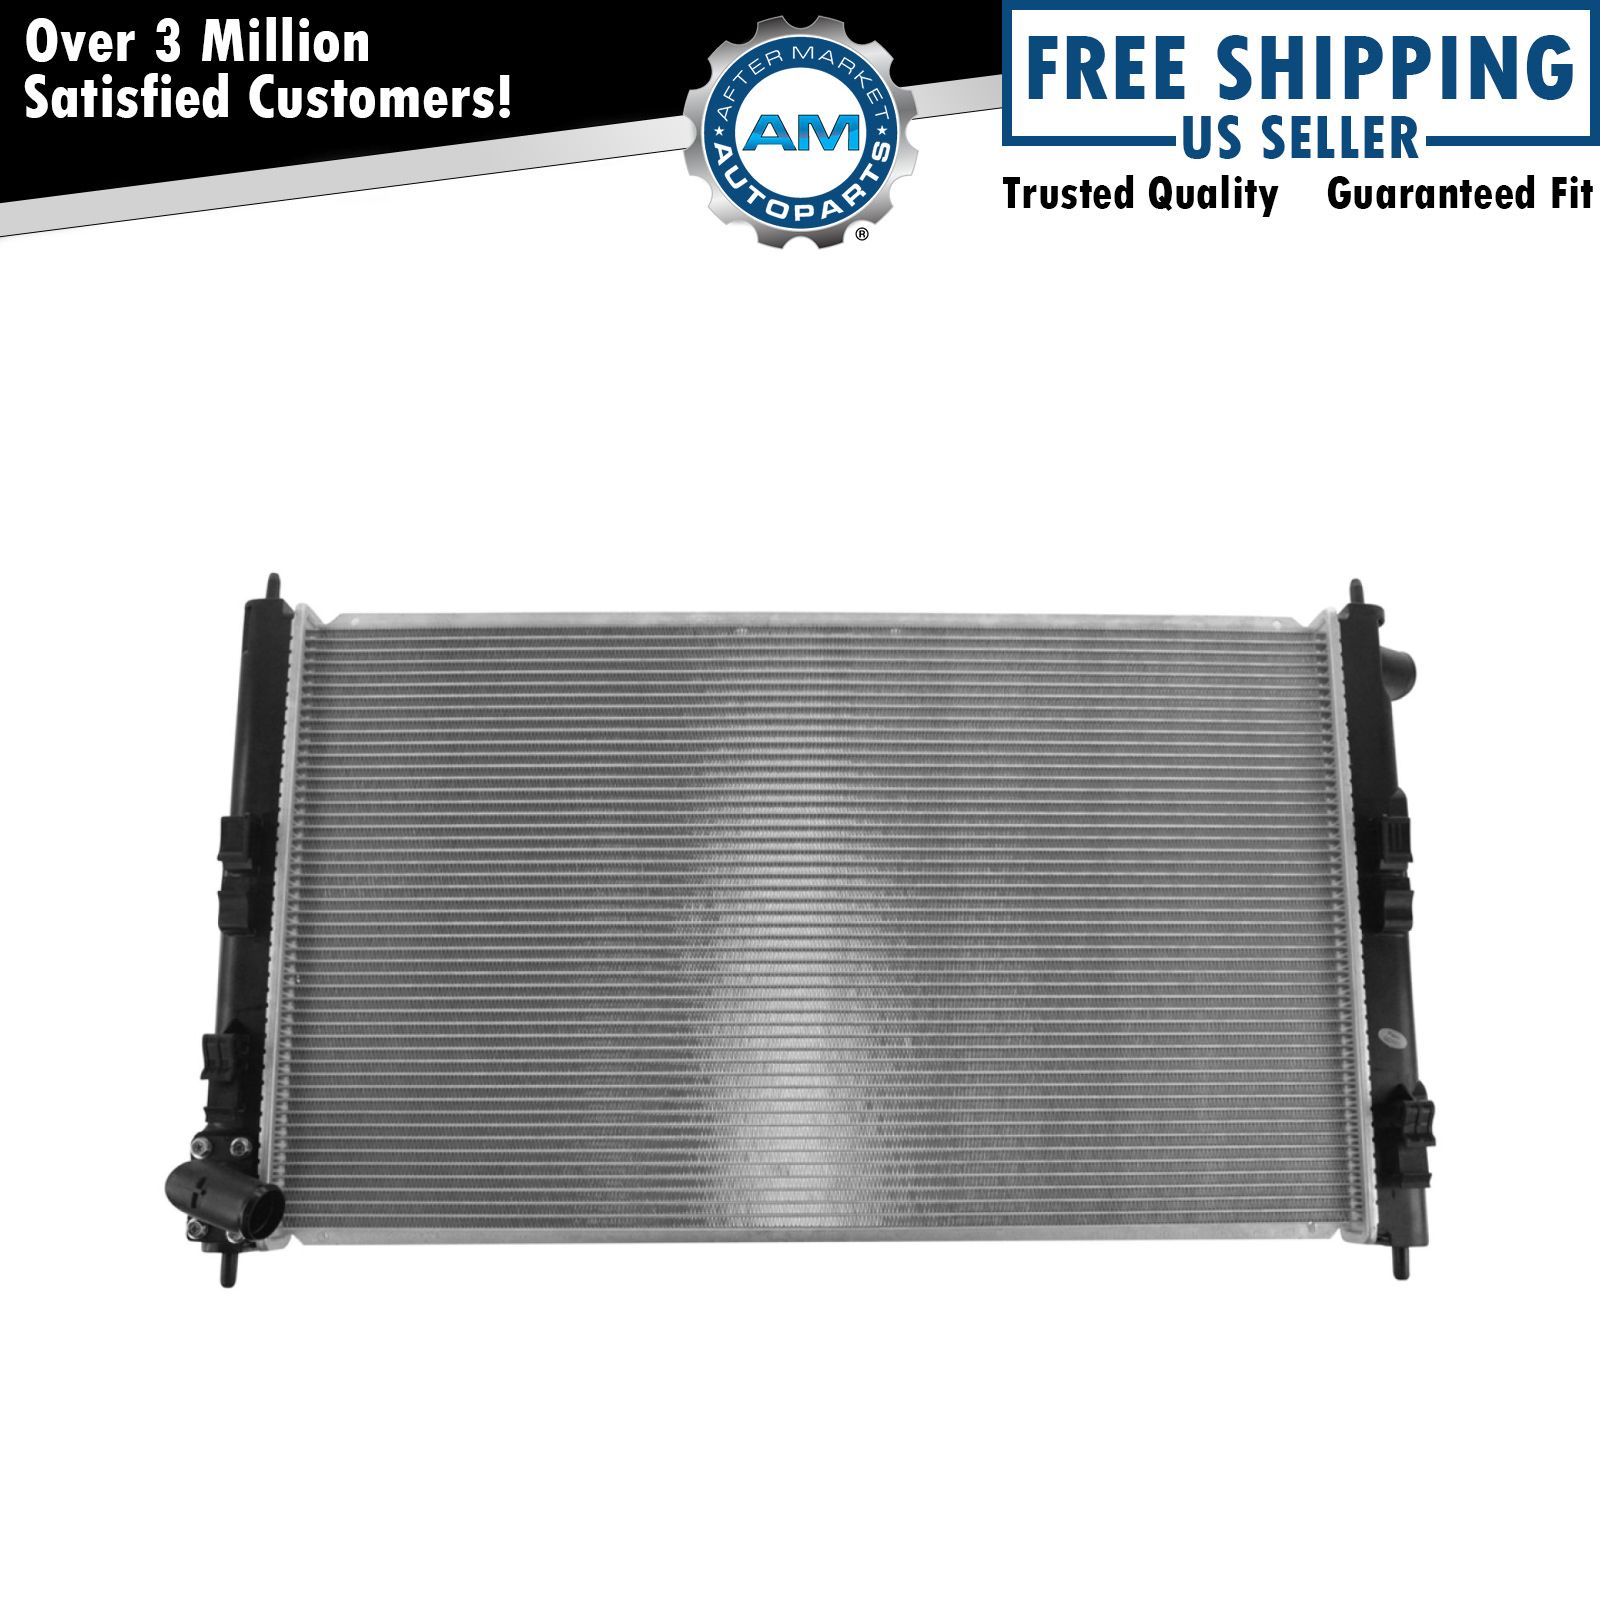 Radiator Assembly Aluminum Core Direct Fit for Mitsubishi Outlander Lancer New